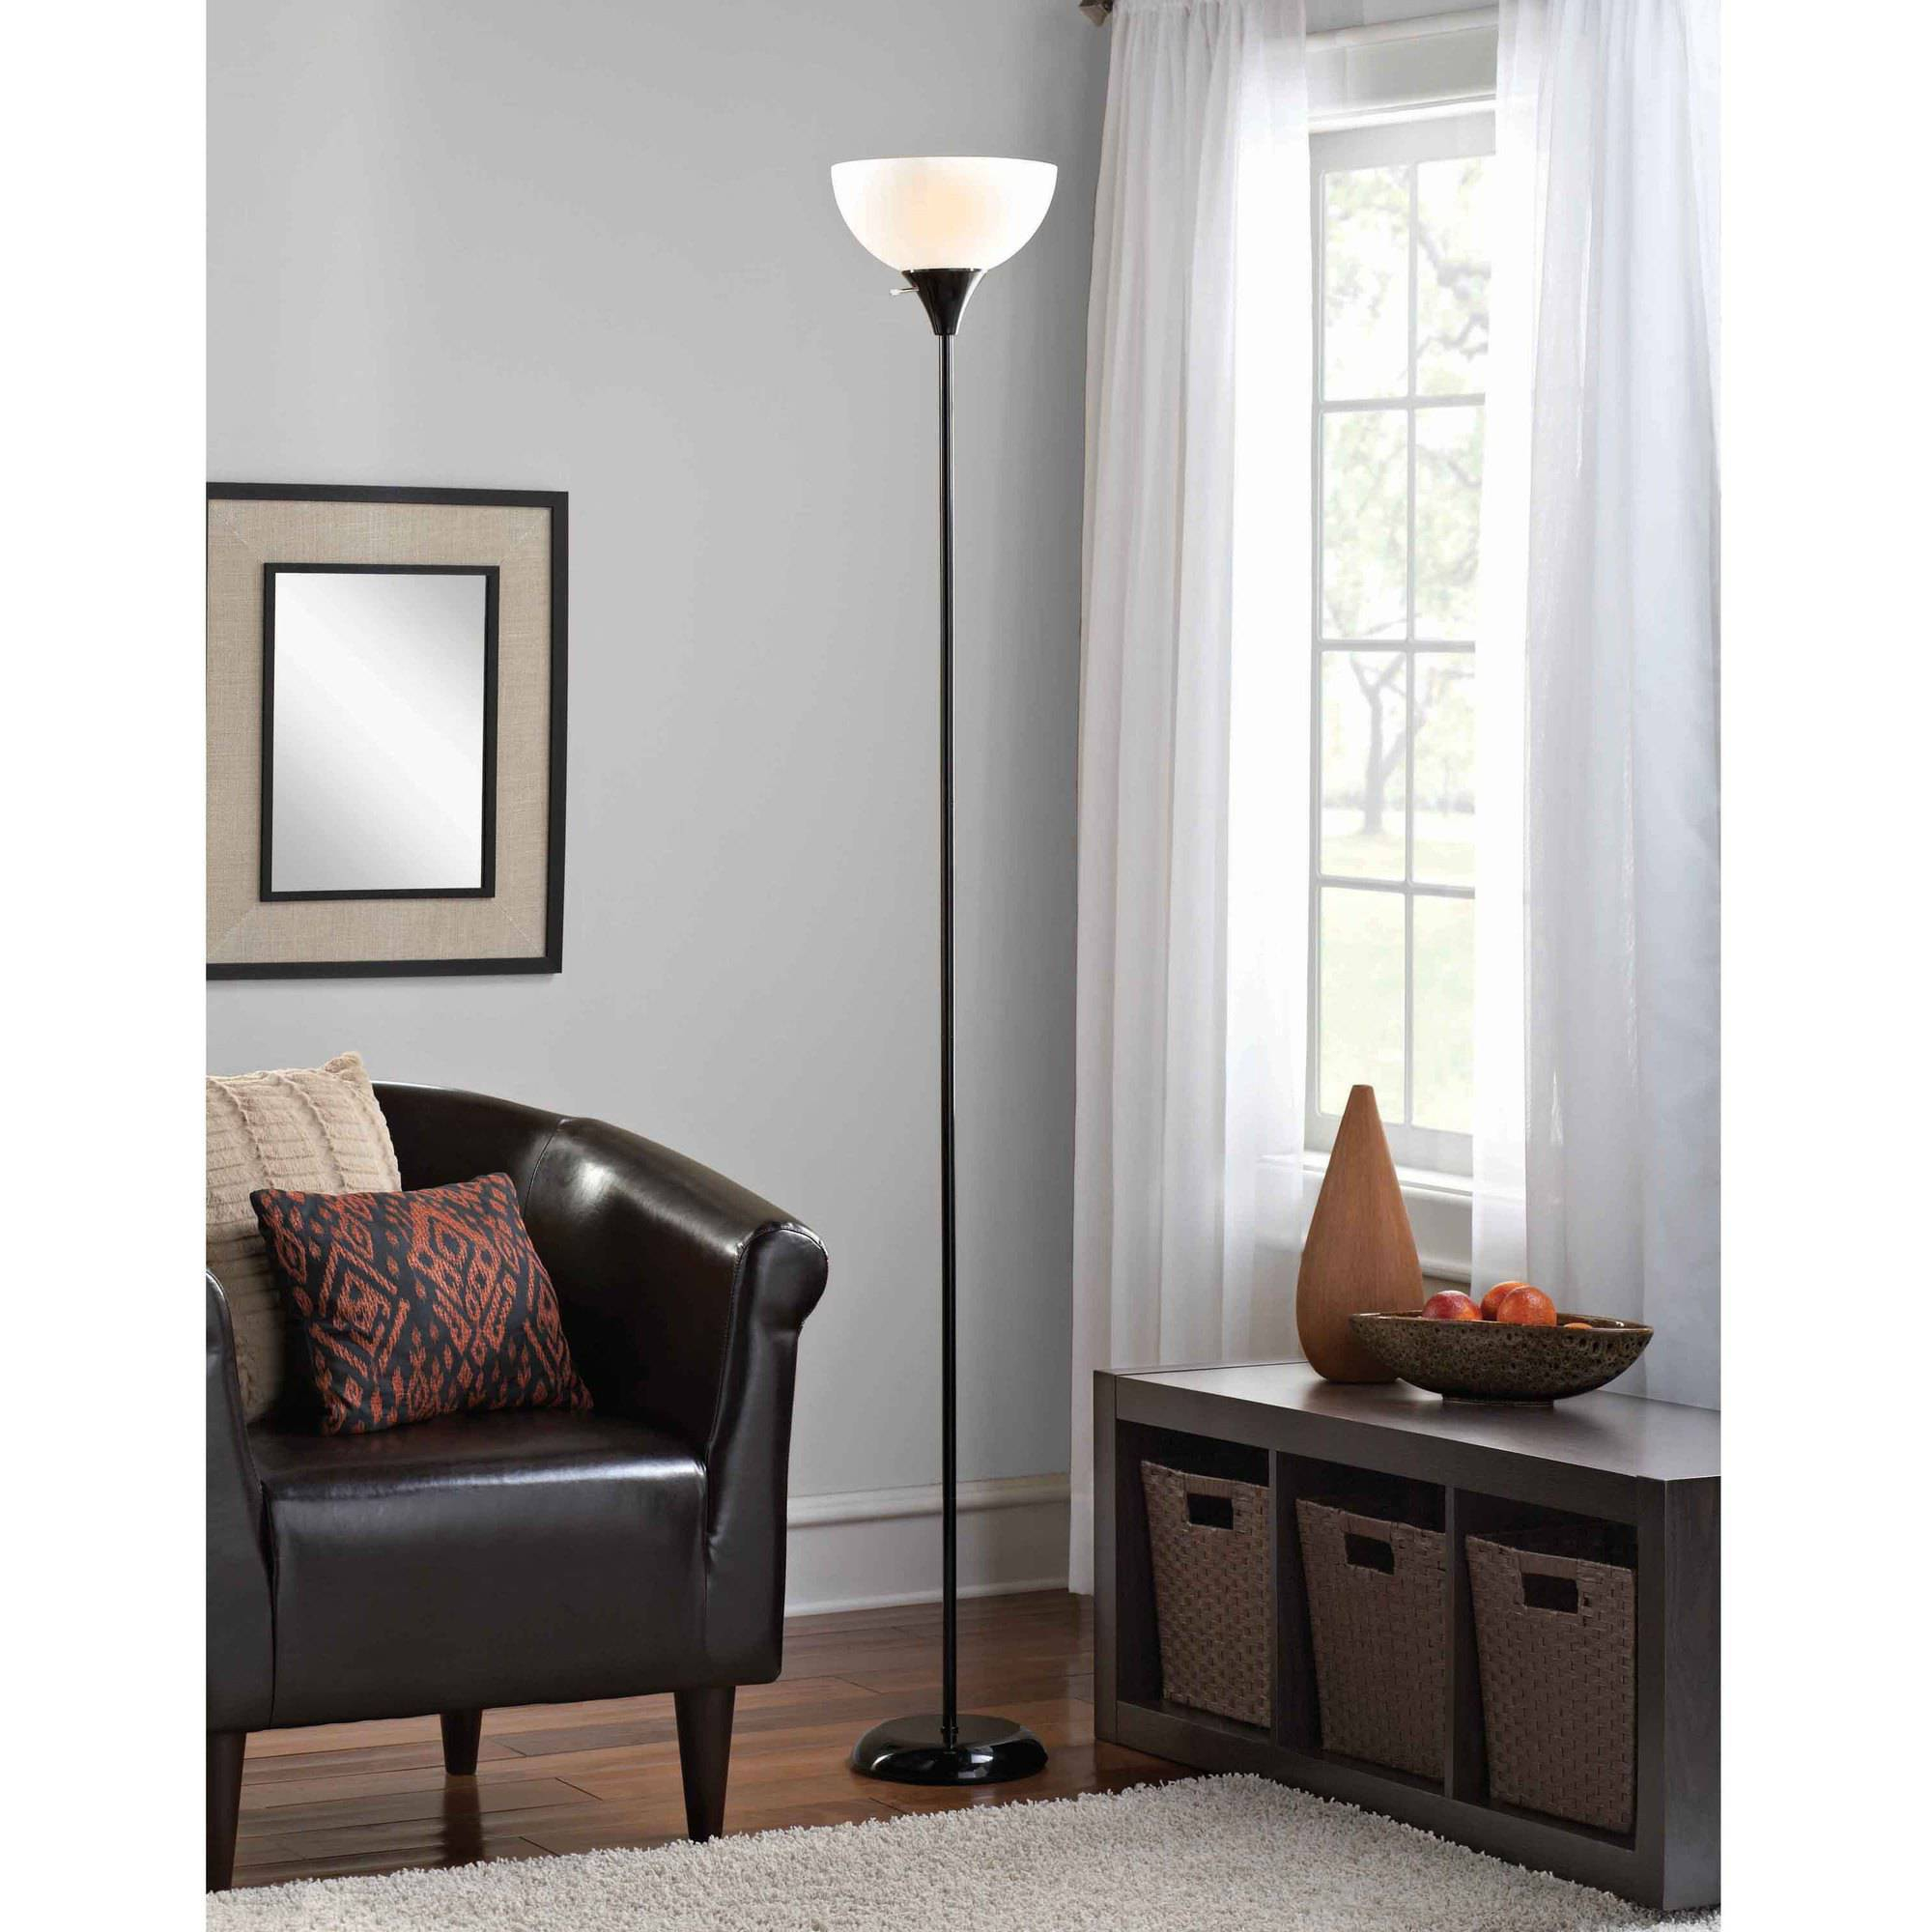 Mainstays Floor Lamp With Bulbs Included Black Walmart with sizing 2000 X 2000